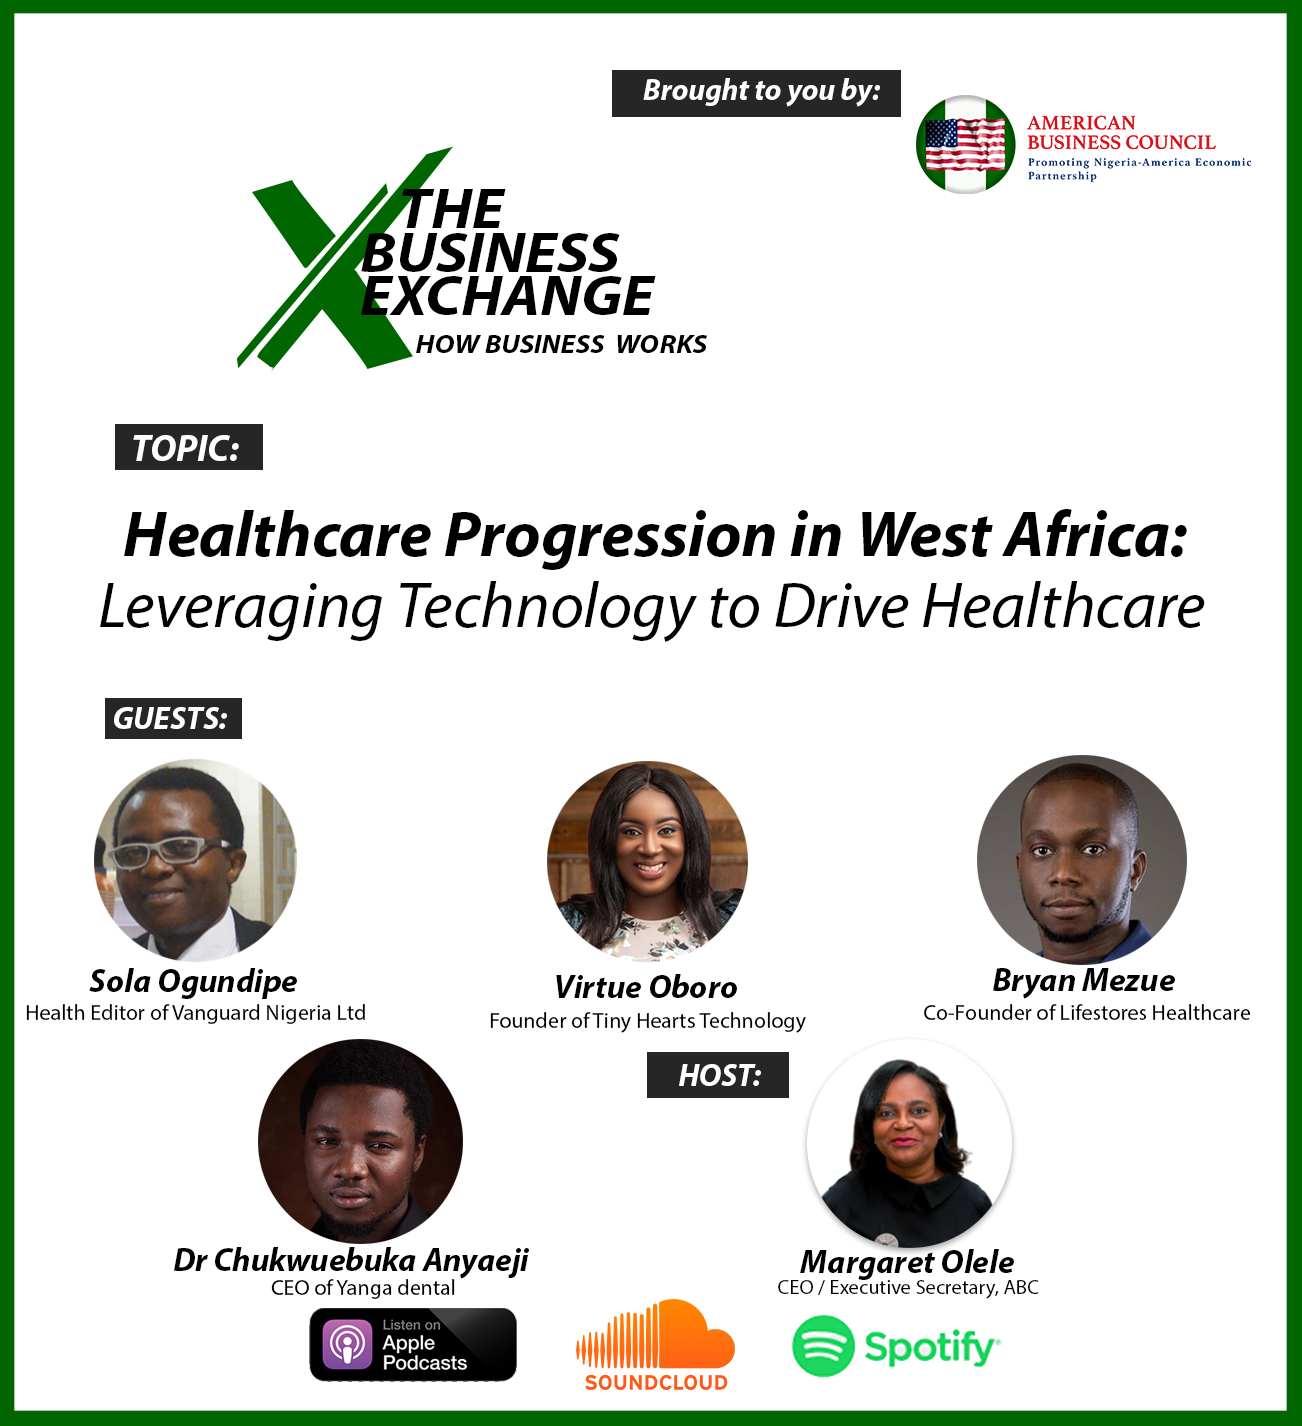 Healthcare Progression in West Africa: Leveraging Technology to Drive Healthcare